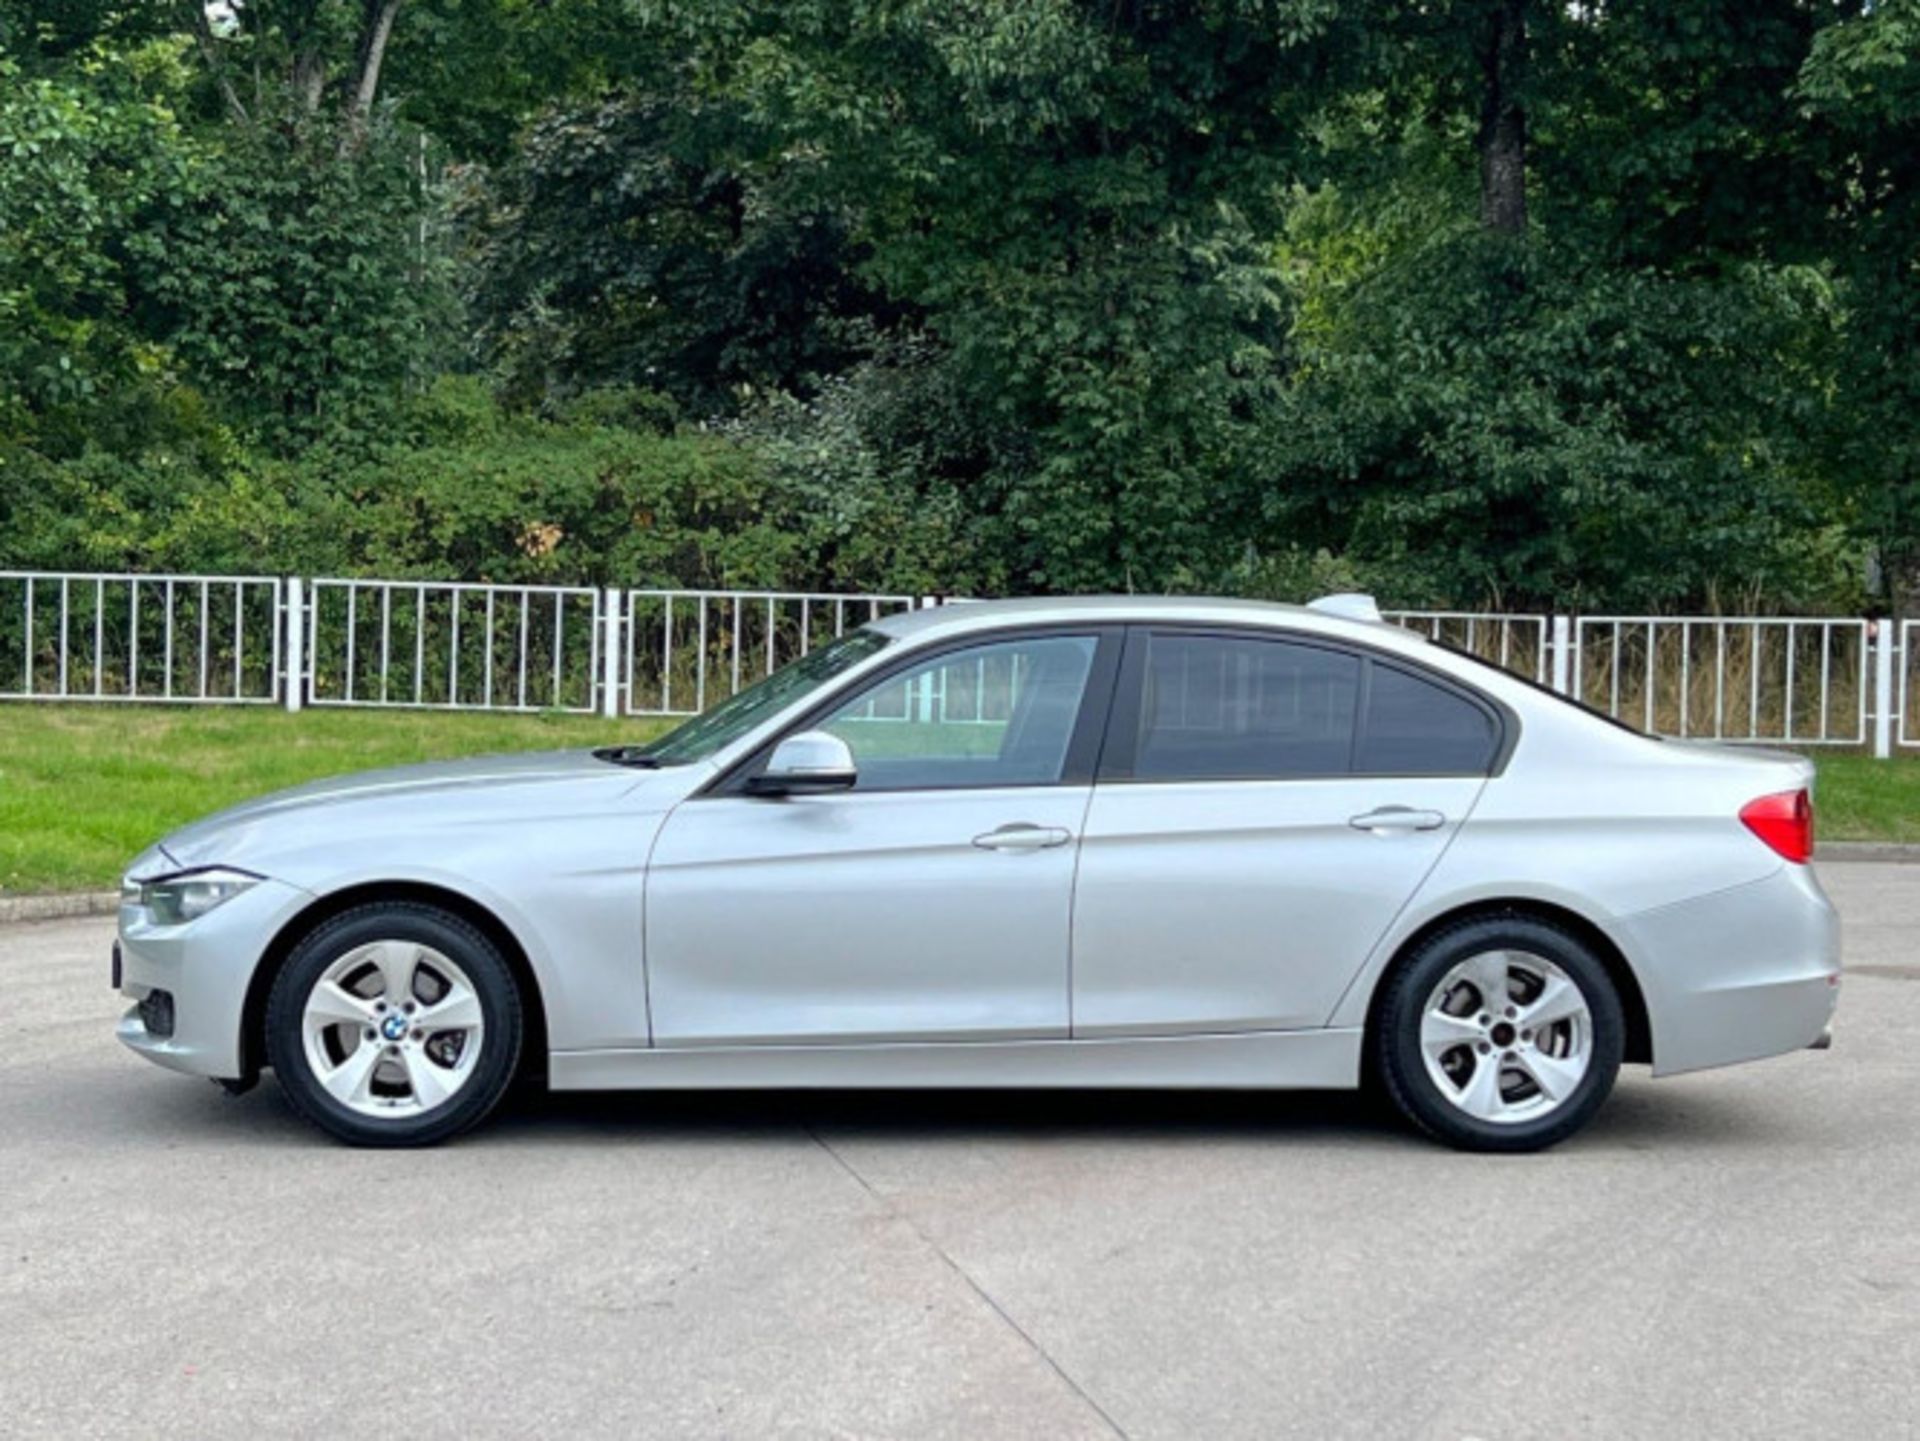 BMW 3 SERIES 2.0 DIESEL ED START STOP - A WELL-MAINTAINED GEM >>--NO VAT ON HAMMER--<< - Image 228 of 229